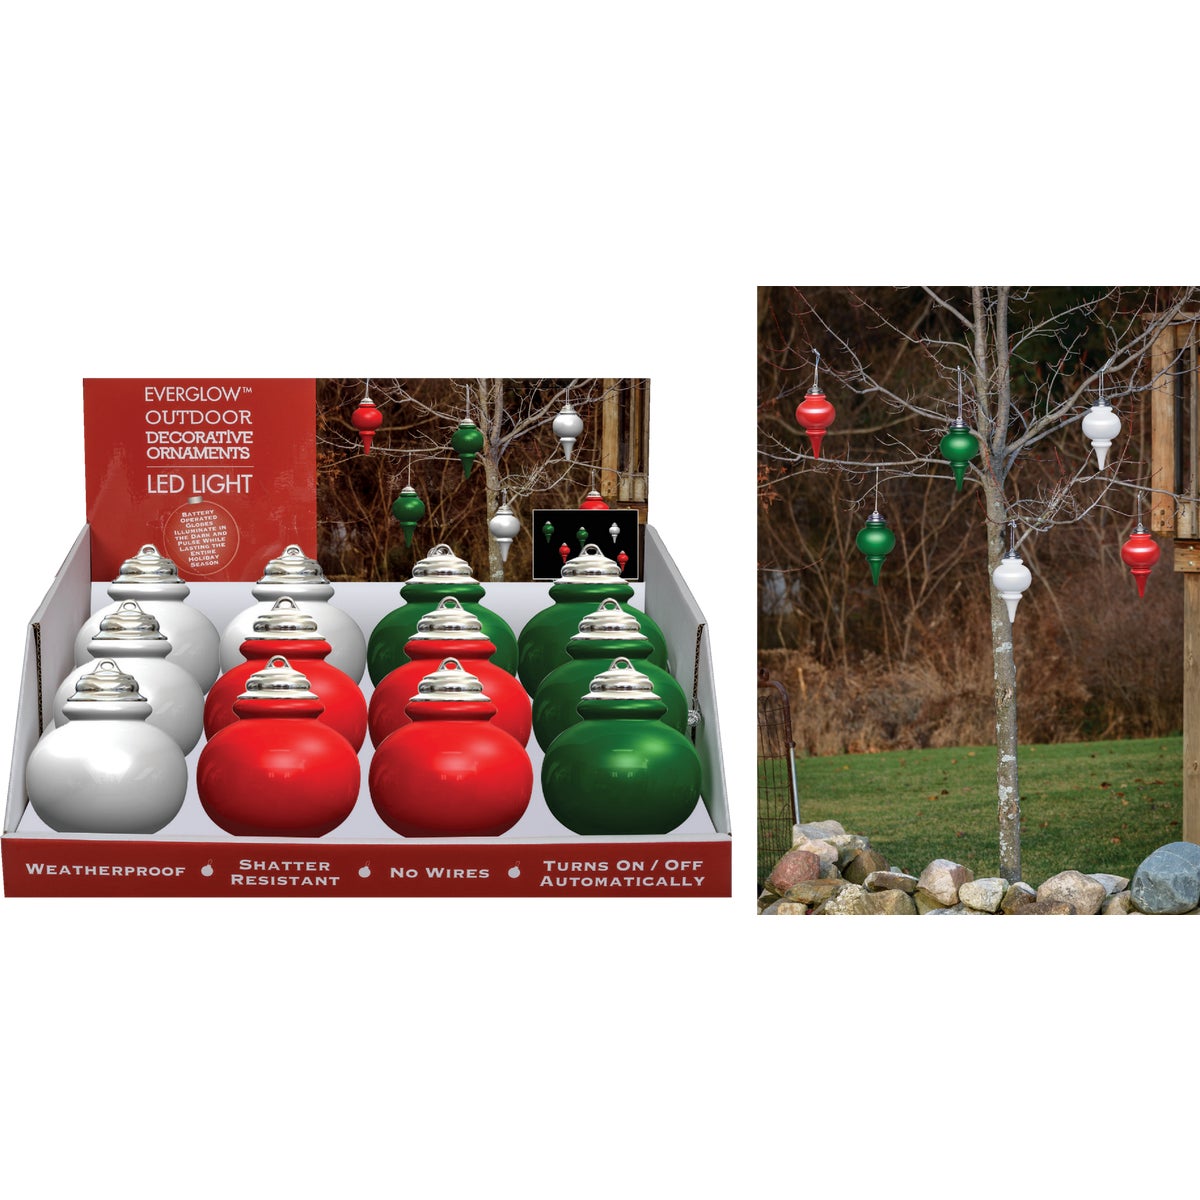 Item 900325, LED (light emitting diode) outdoor finial ornament.